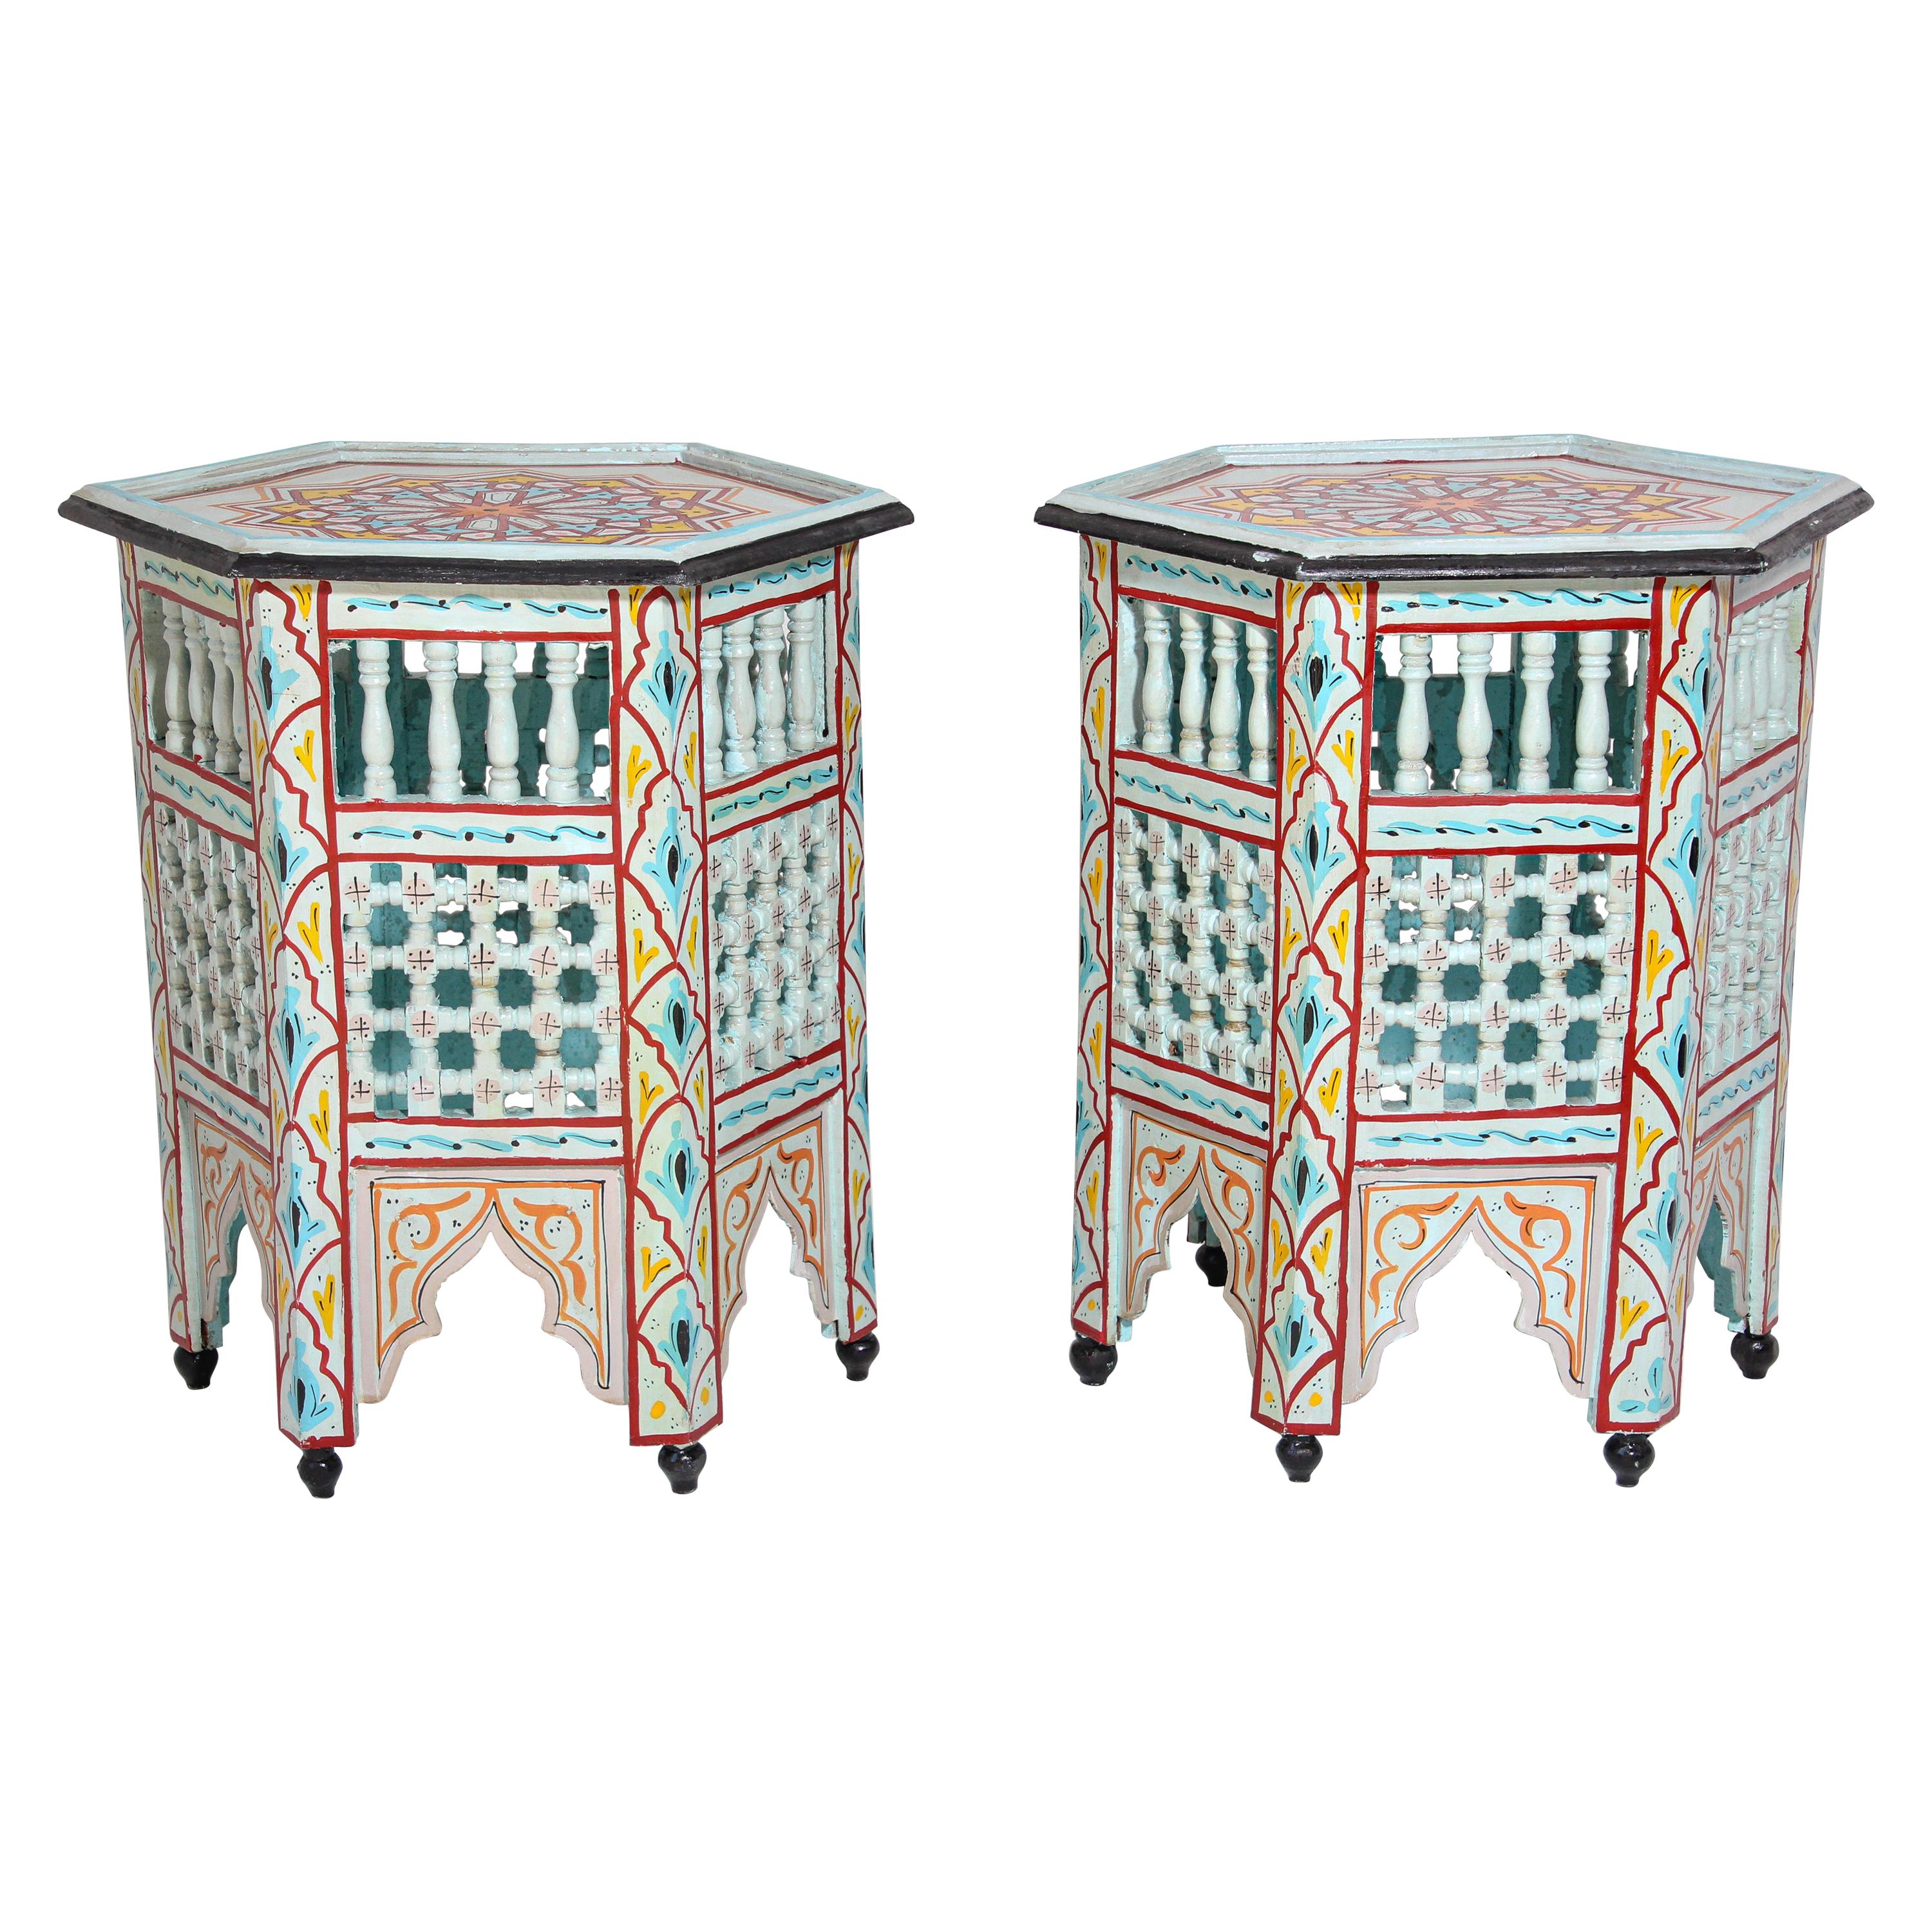 Pair of Moroccan Hand Painted Ivory Tables